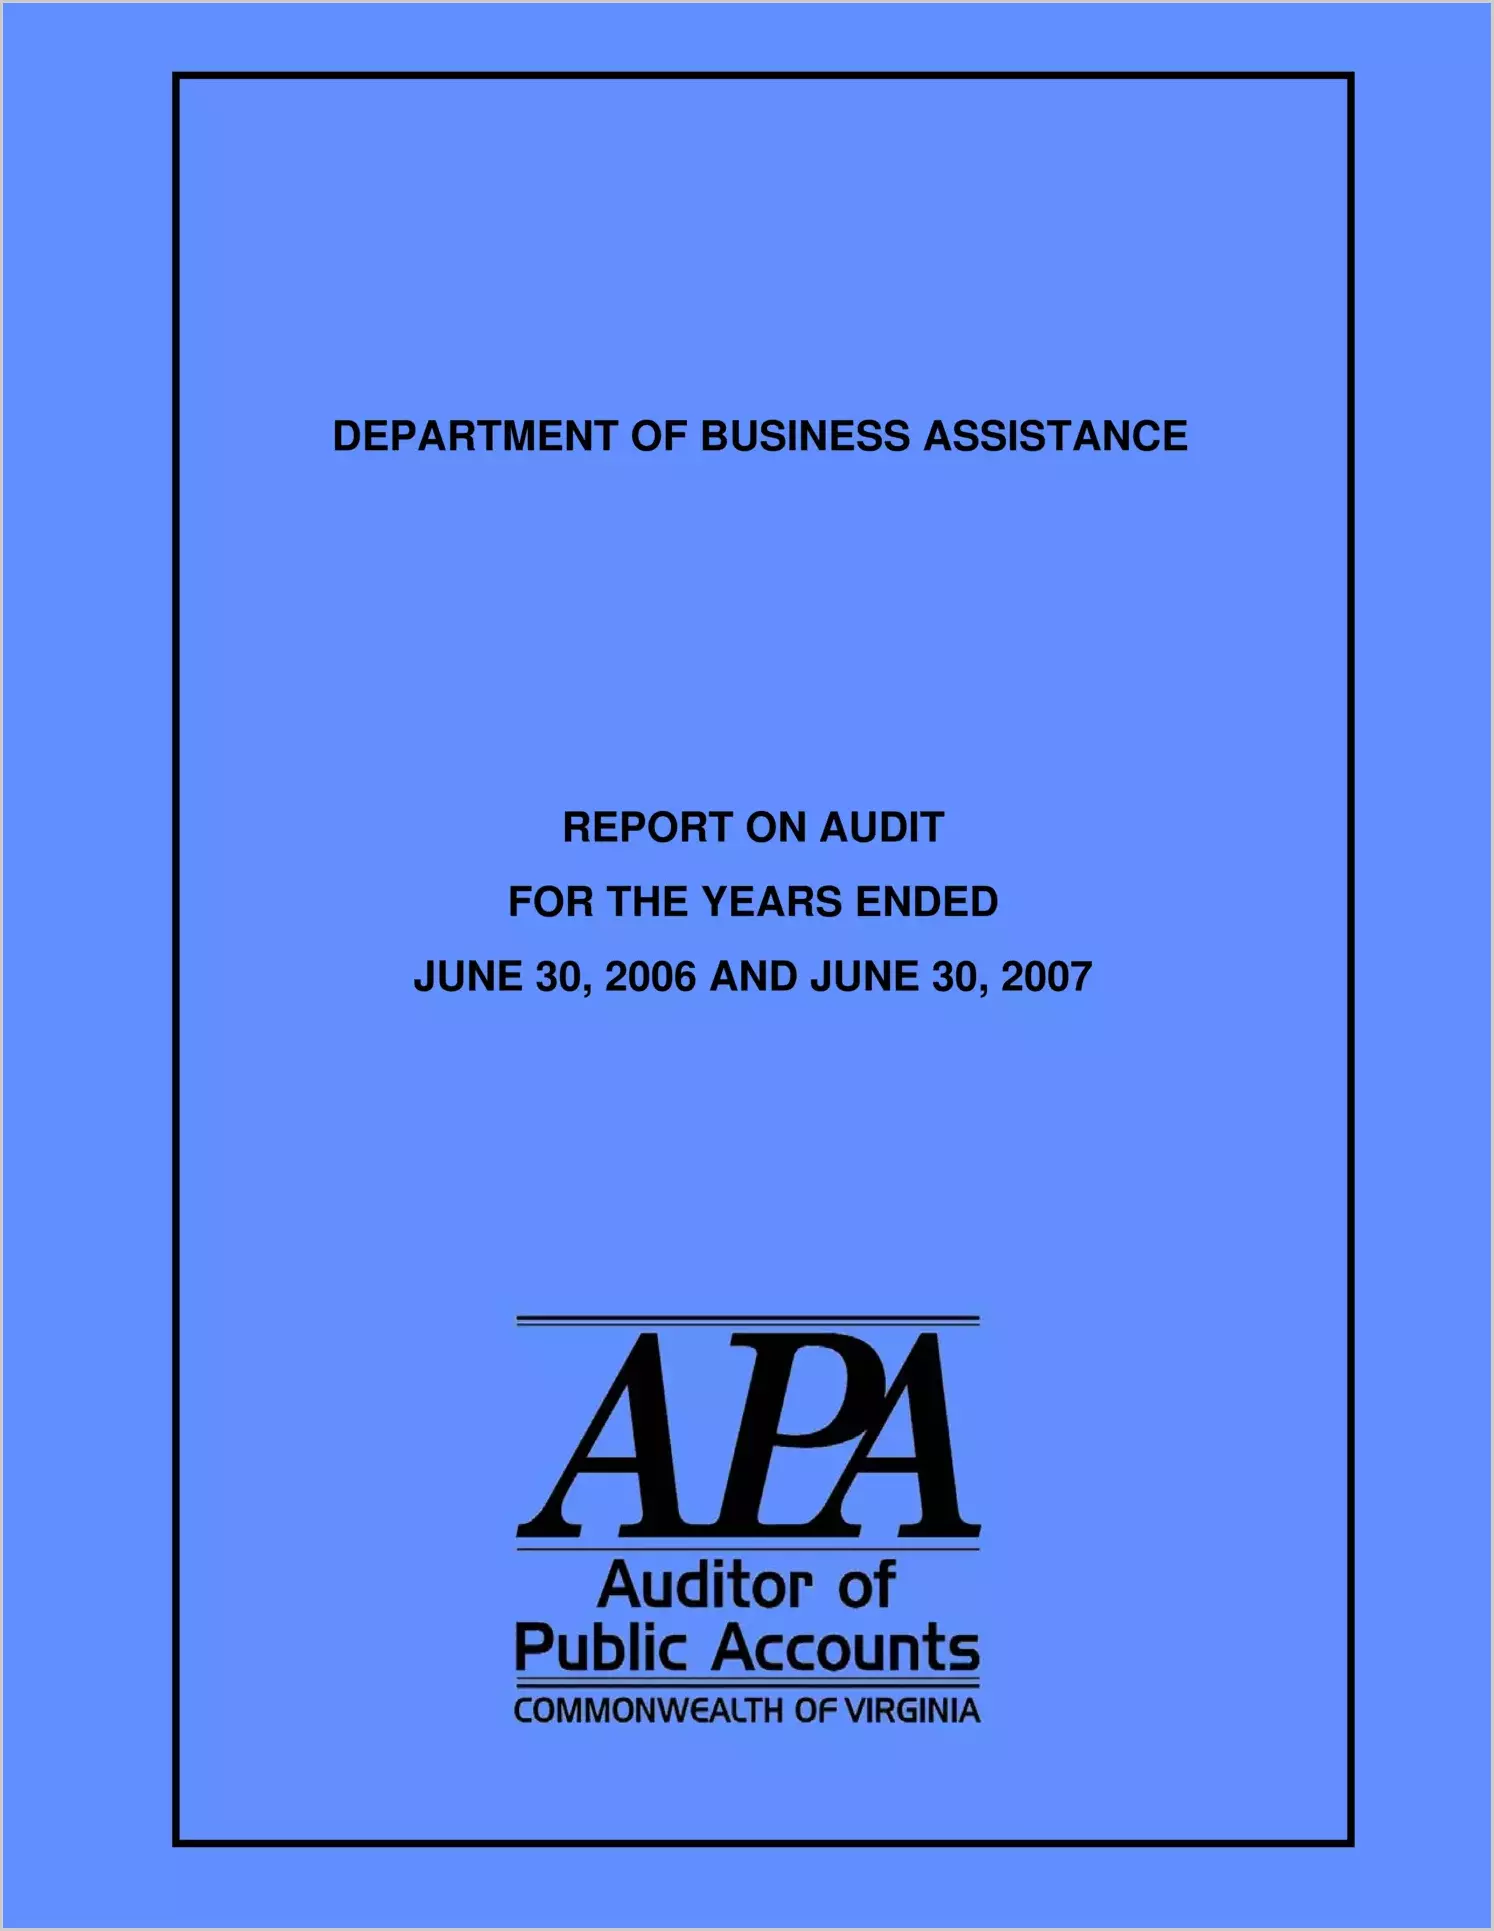 Department of Business Assistance for the years ended June 30, 2006 and 2007